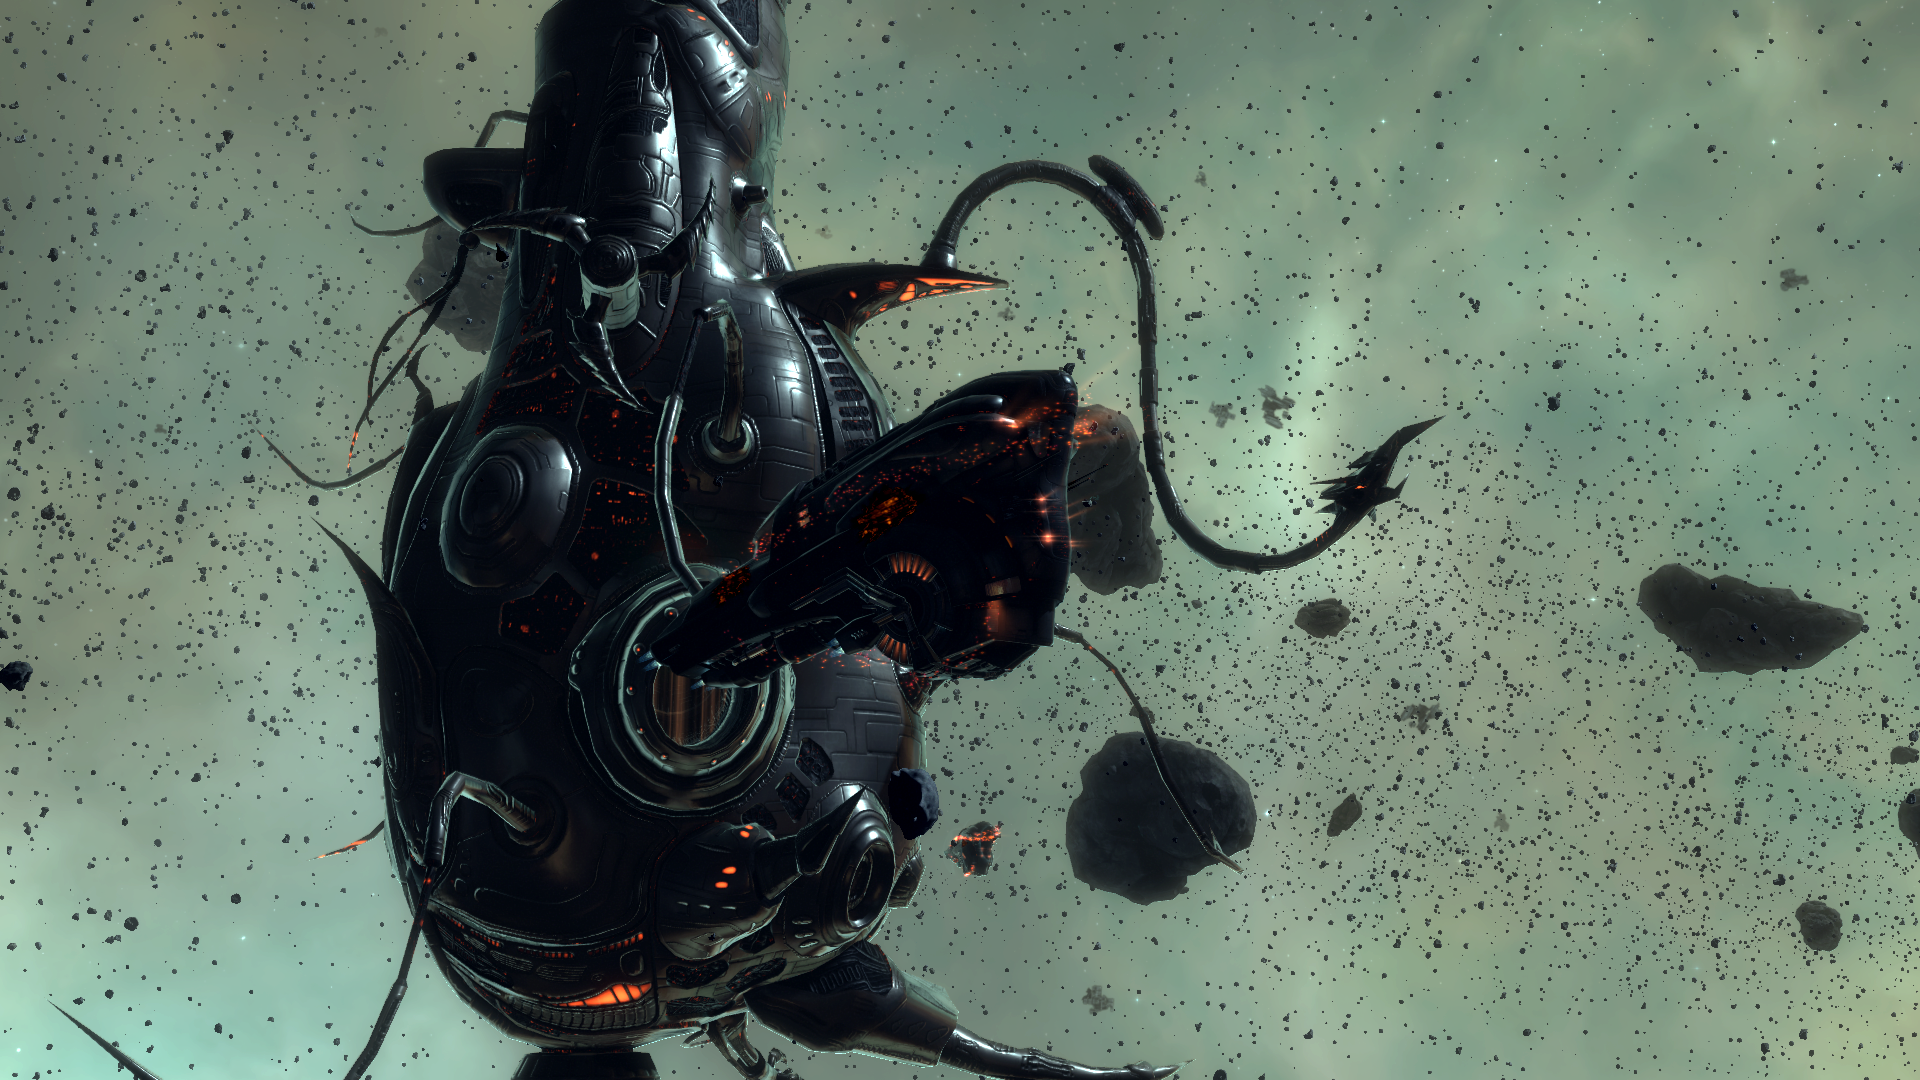 eve_online___rogue_drone_by_vollhov-daqr